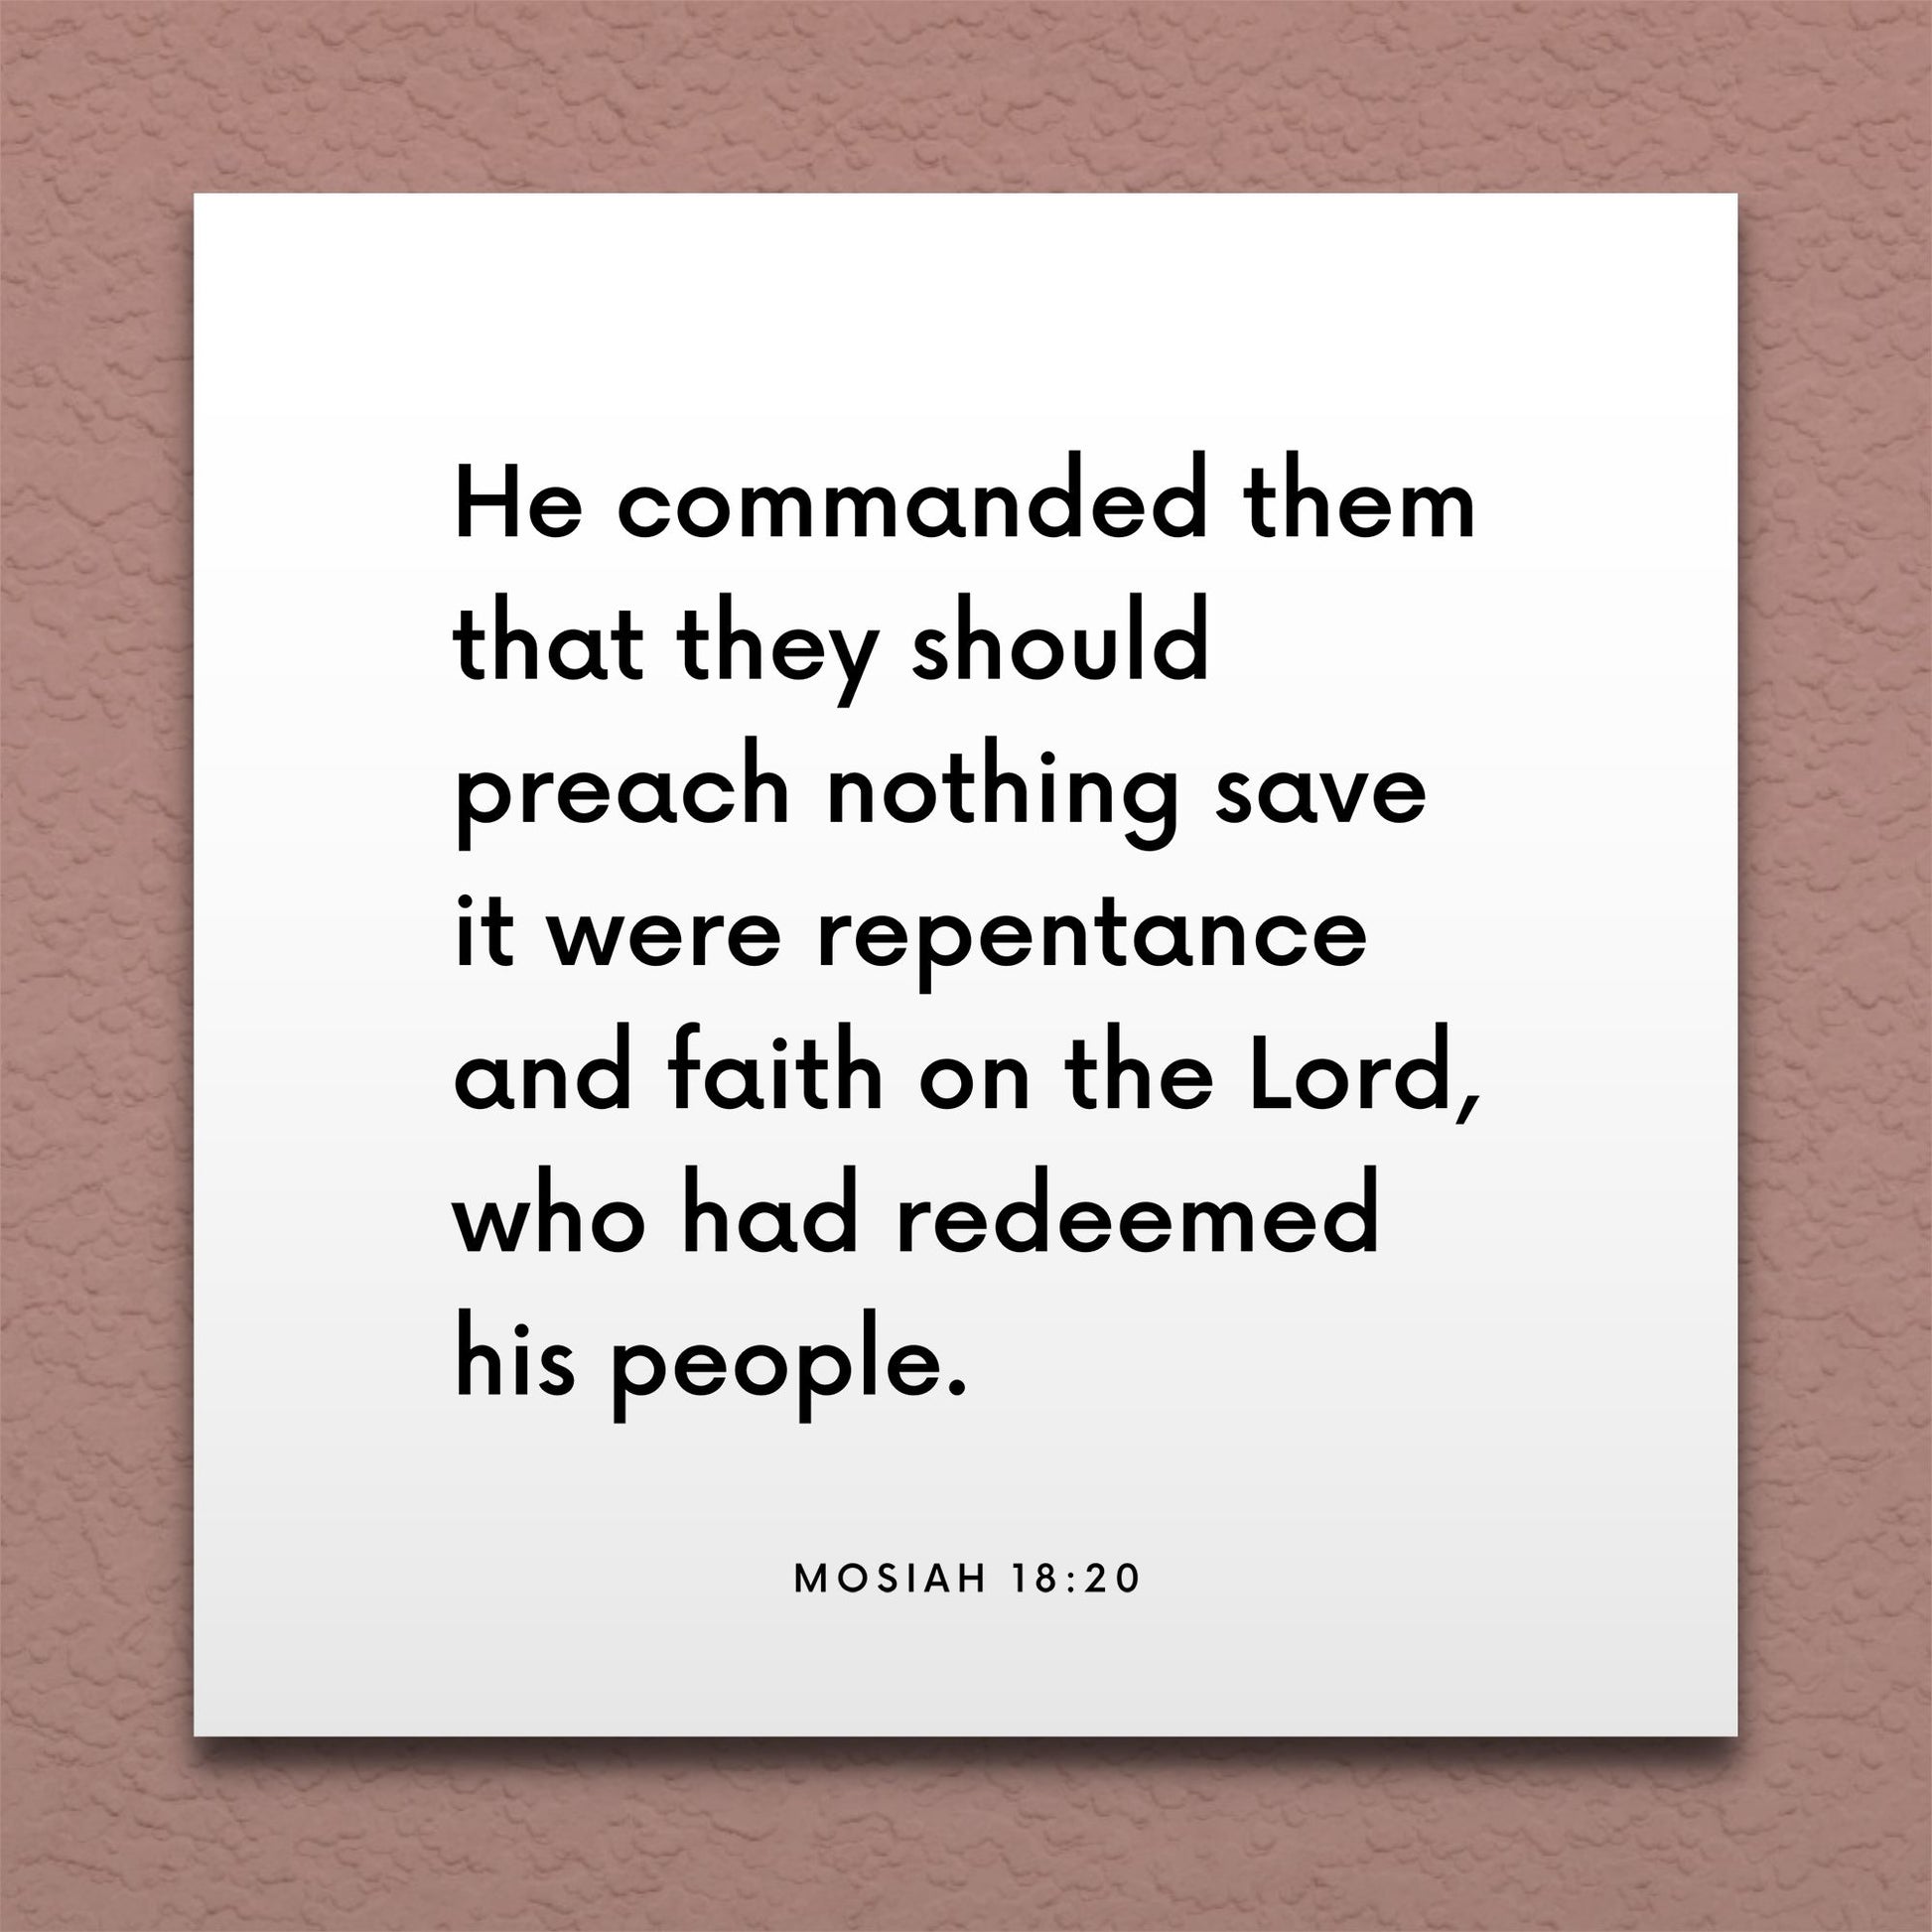 Wall-mounted scripture tile for Mosiah 18:20 - "They should preach nothing save it were repentance and faith"